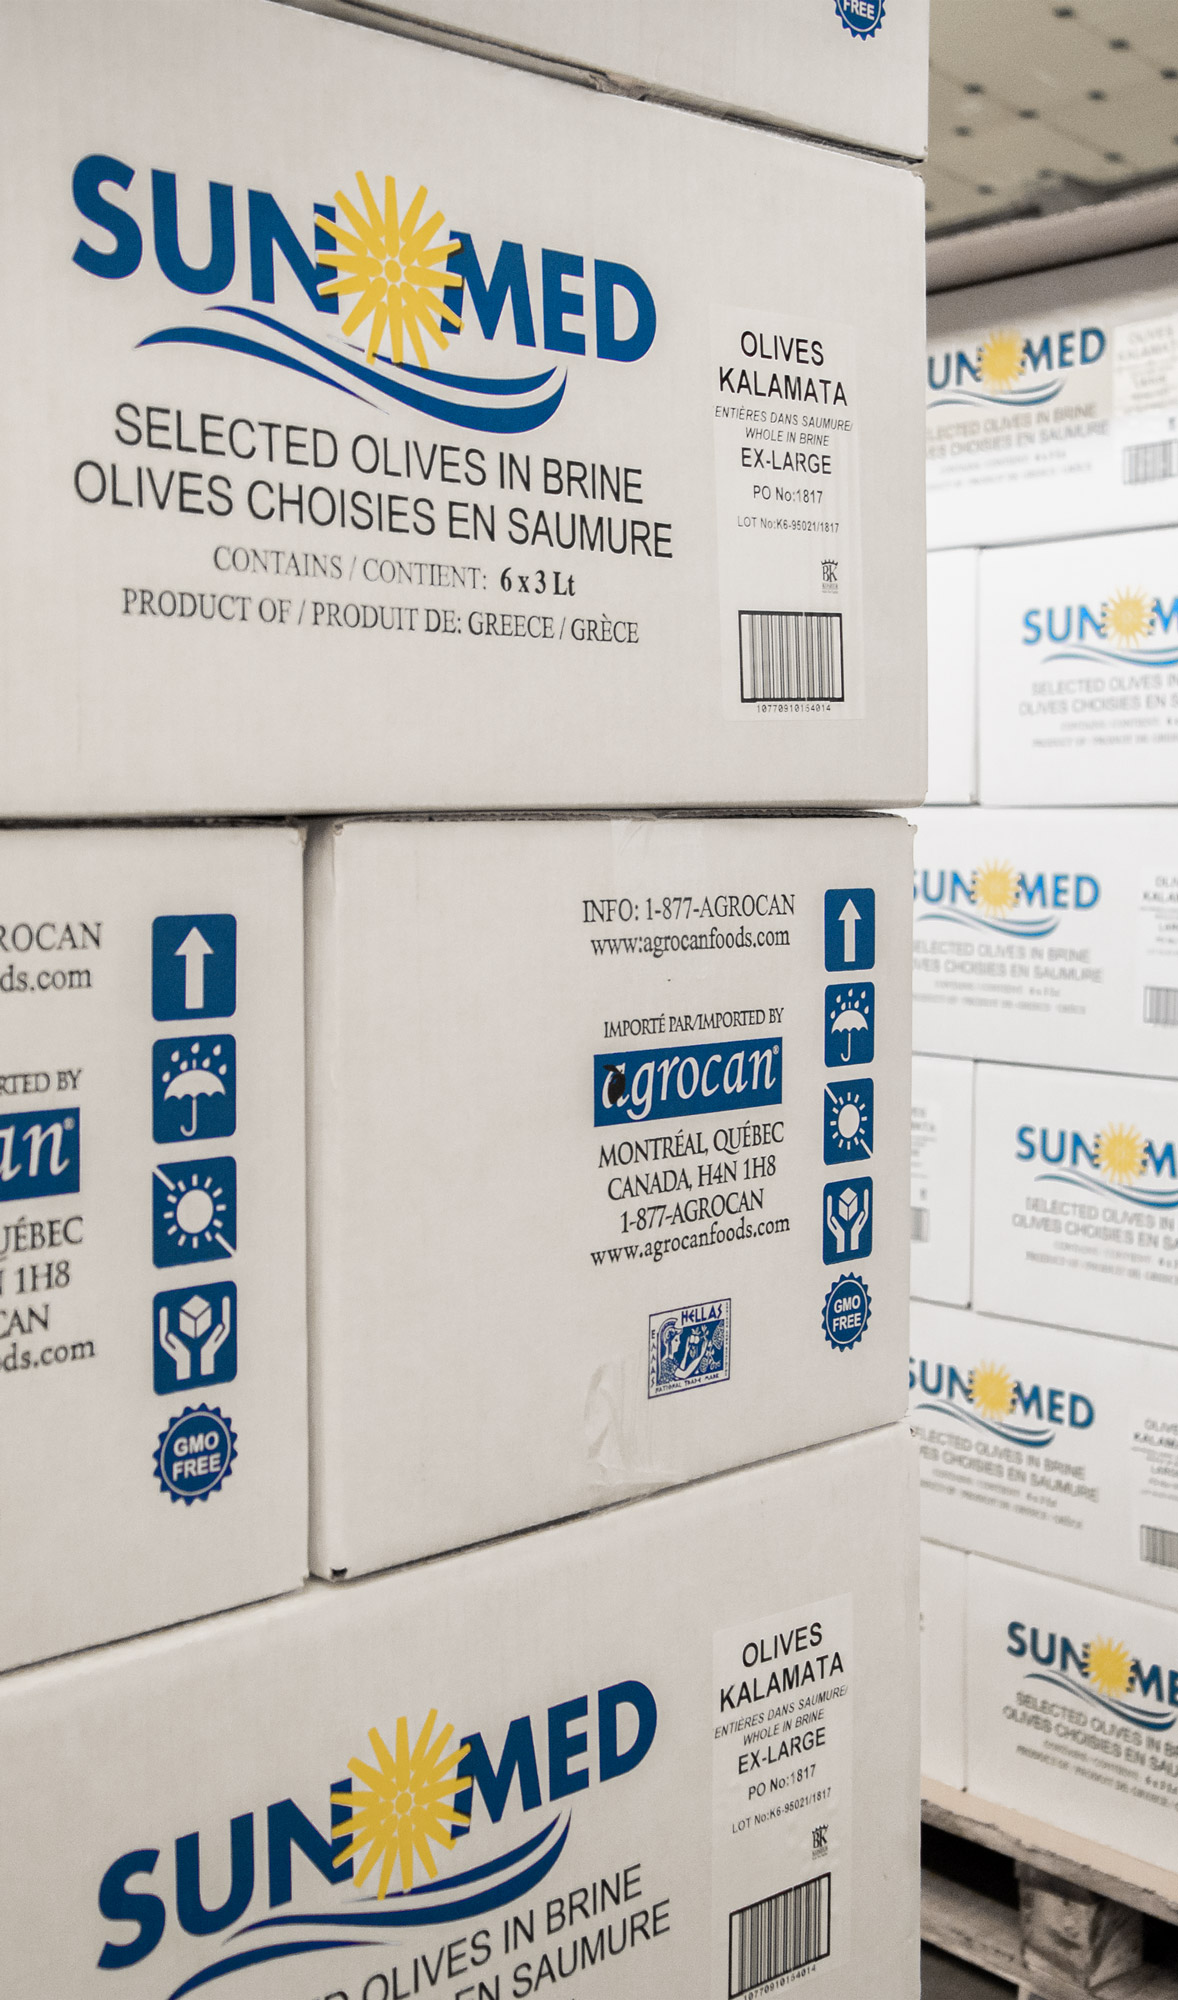 SUNMED branded stacked cartons filled with products